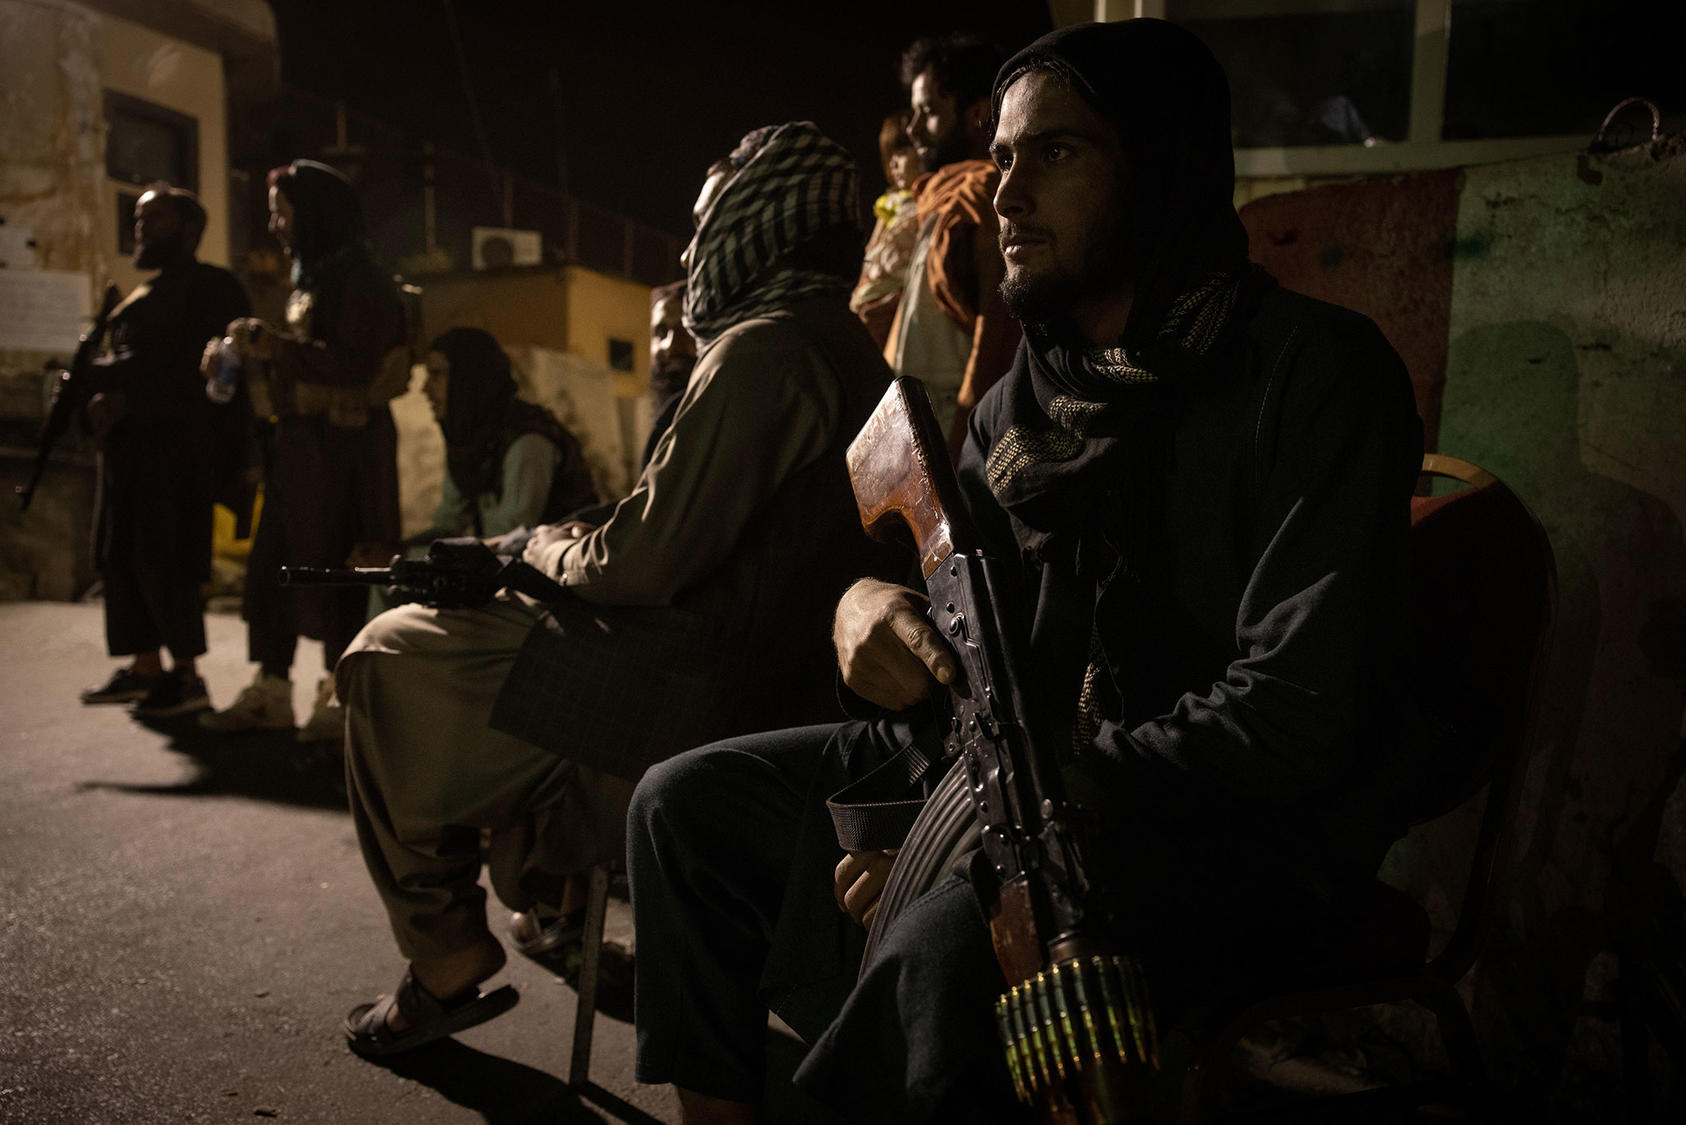 Taliban fighters at a checkpoint in central Kabul, Afghanistan on Tuesday evening Aug. 17, 2021. (Jim Huylebroek/The New York Times)